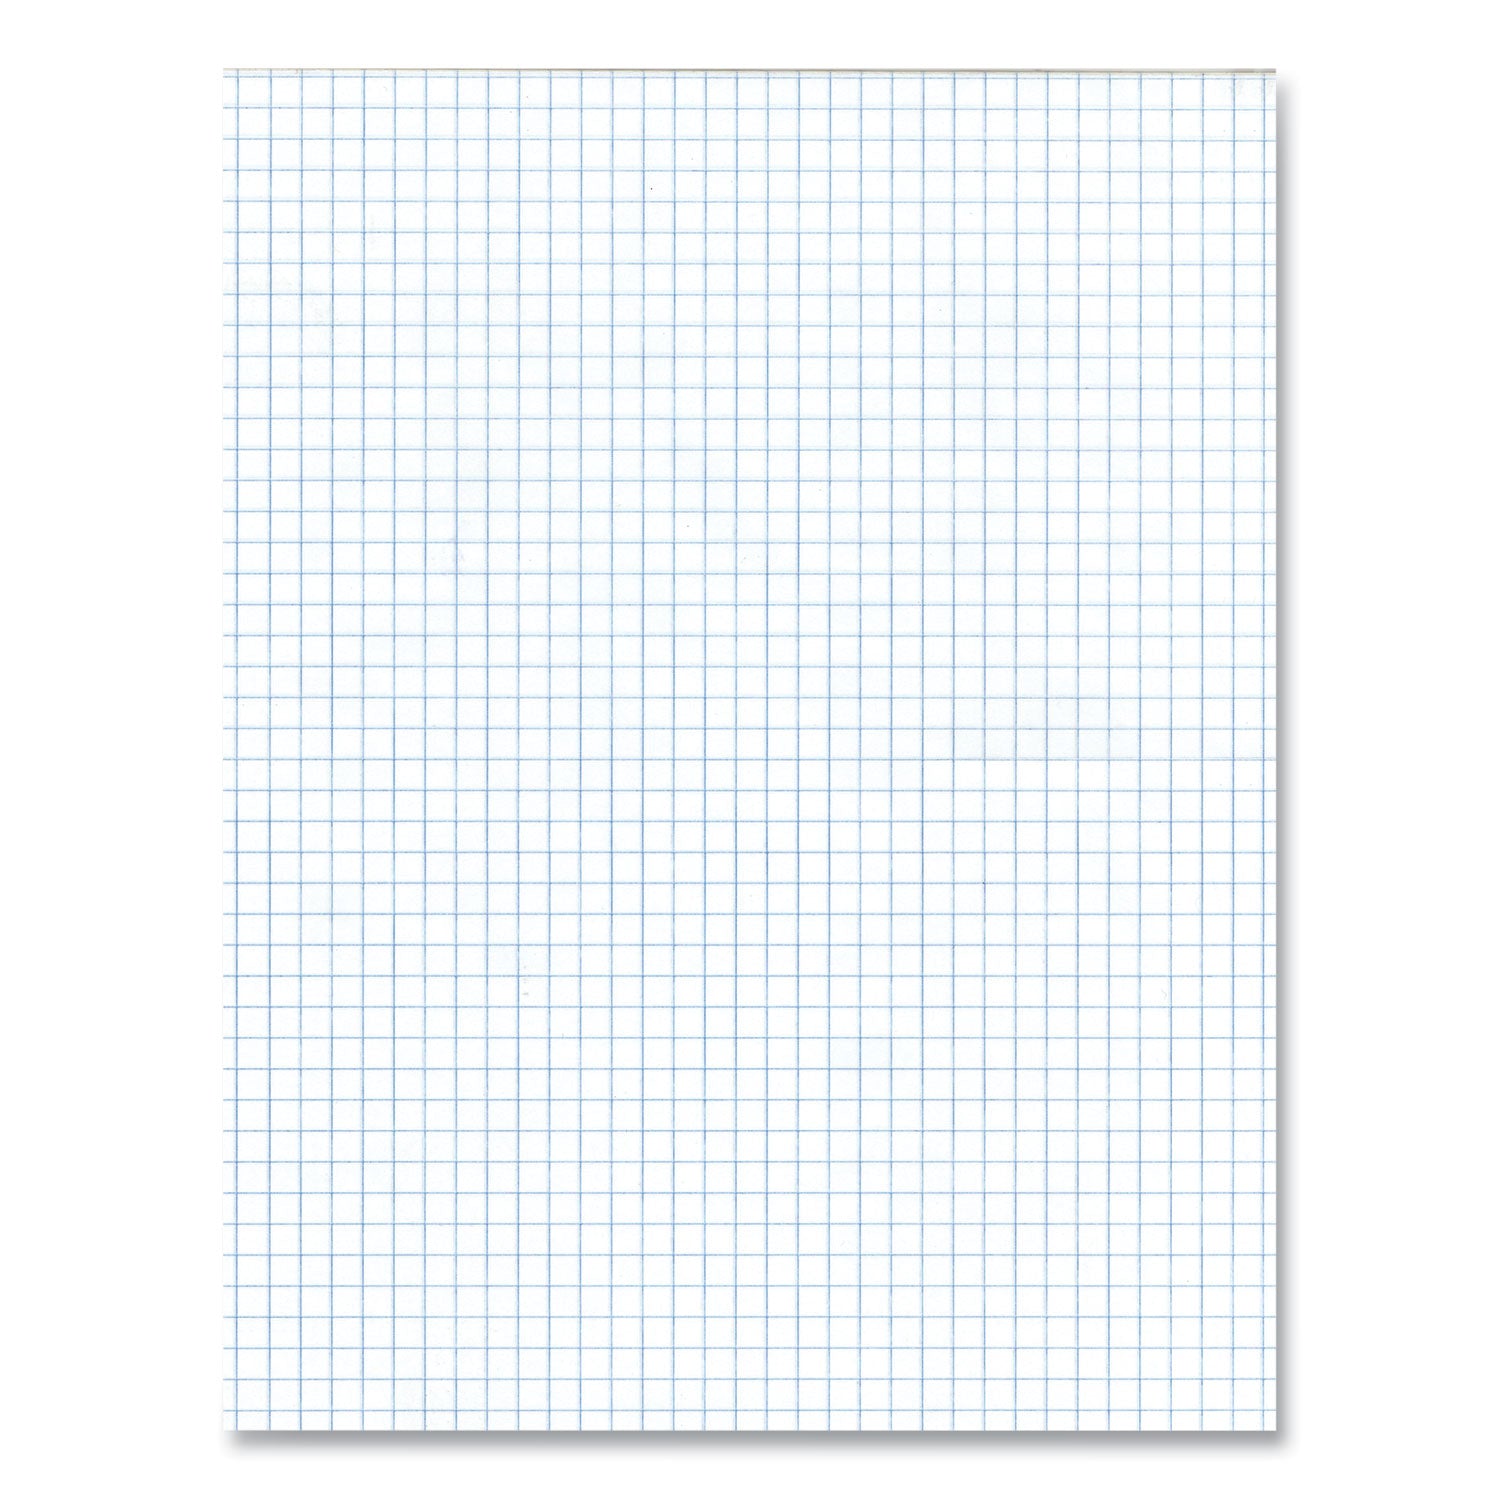 gummed-pad-4-sq-in-quadrille-rule-50-white-85-x-11-sheets-72-carton-ships-in-4-6-business-days_roa95160cs - 4